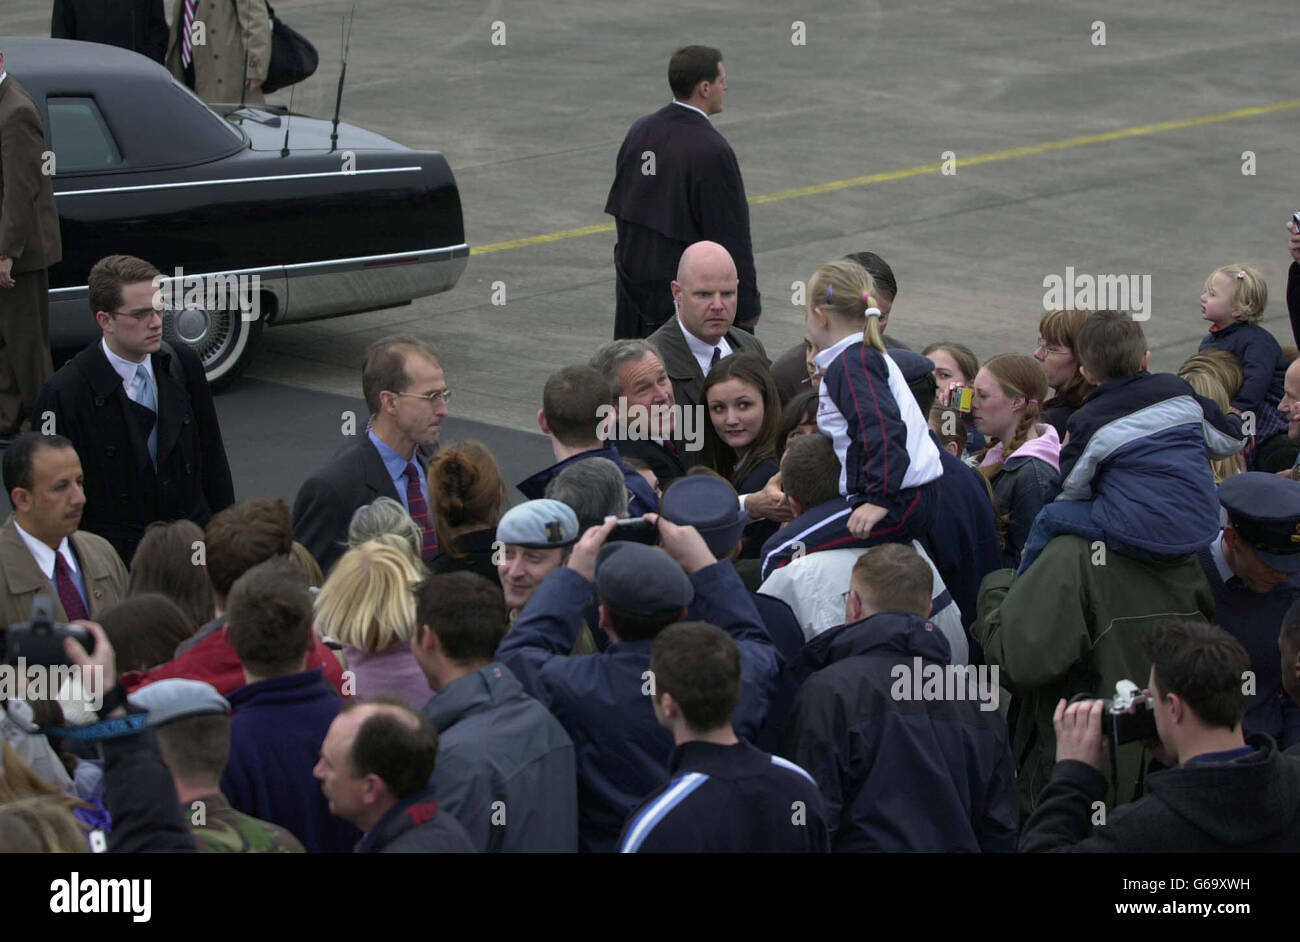 US President George W Bush is greeted by some of the families working at RAF Aldergrove, in Northern Ireland, where he touched down in Airforce One. * Mr Bush continued by Black Hawk helicopter from the base to Hillsborough Castle, outside Belfast, for talks on the war in Iraq with British Prime Minister Tony Blair. Mr Bush was also expected to use the visit to urge politicians and paramilitaries in Northern Ireland to go the extra mile for peace. Stock Photo